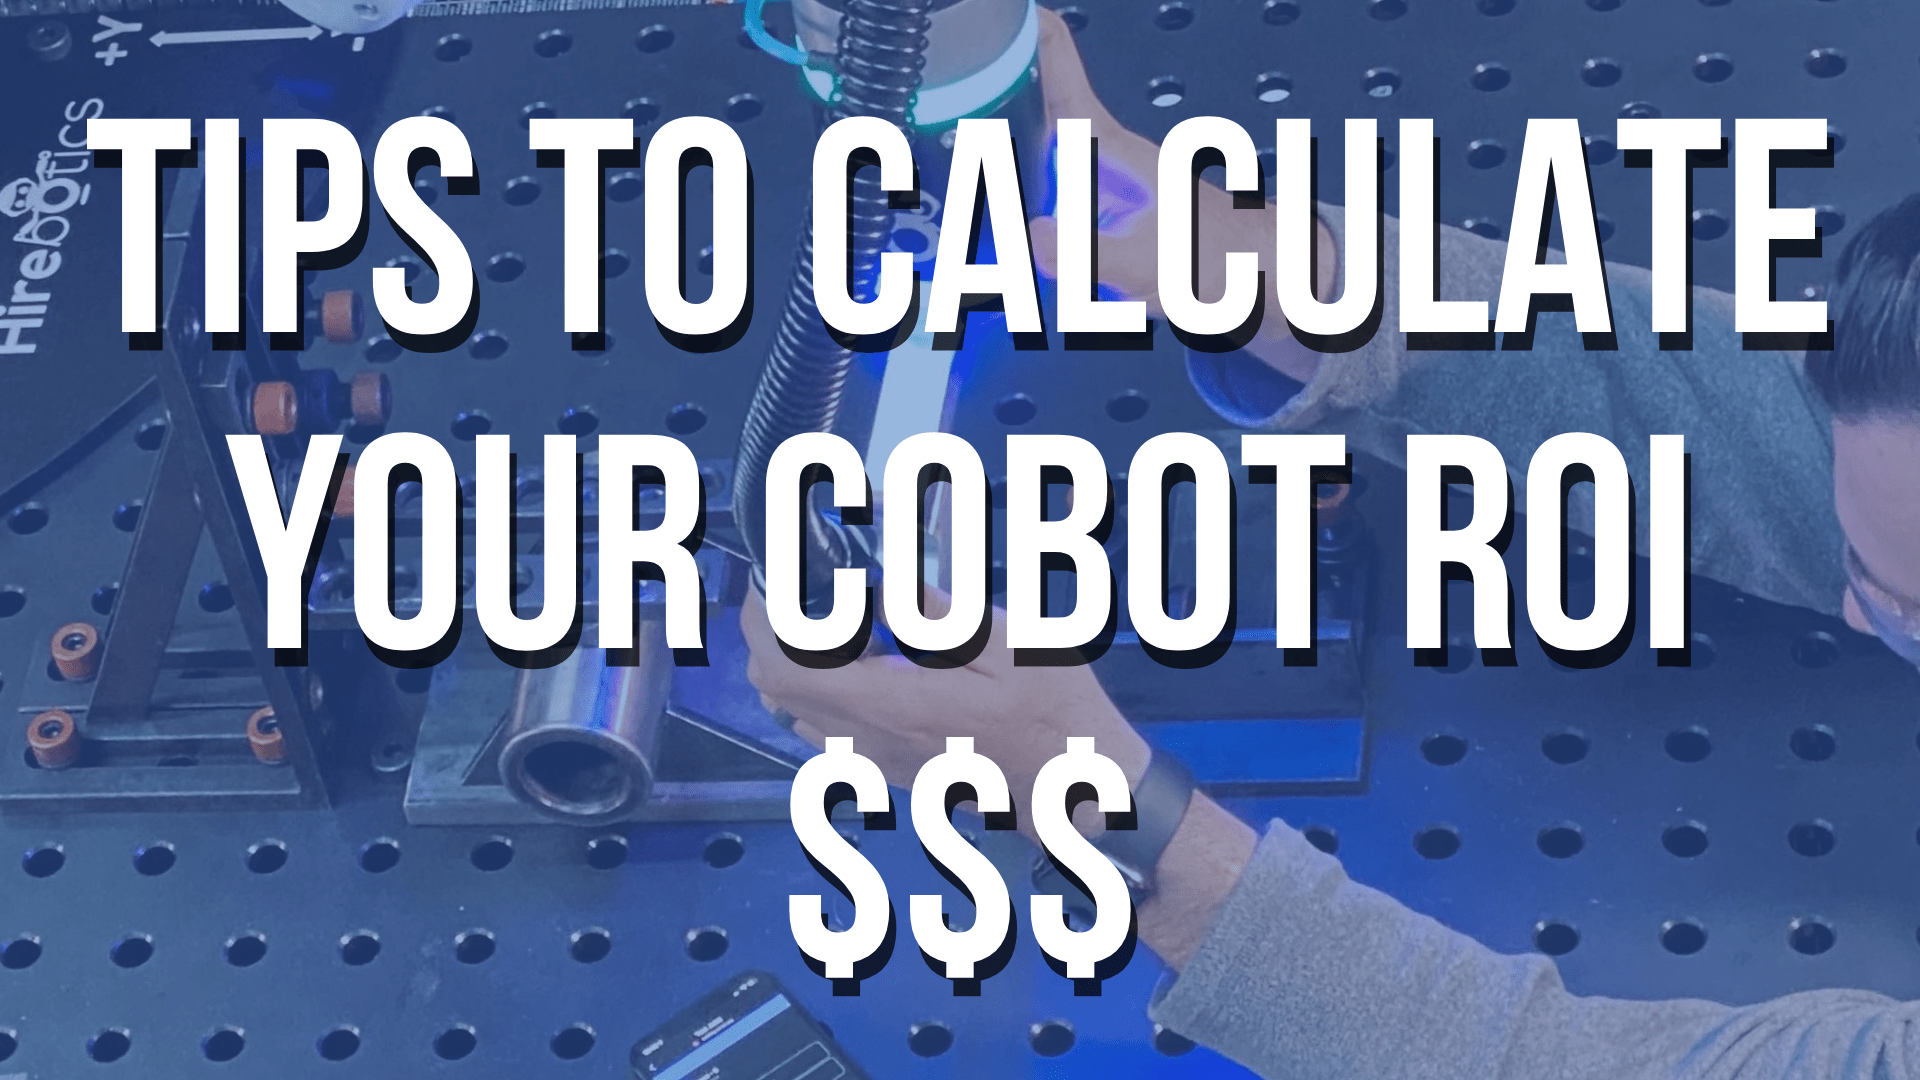 Tips To Calculate The ROI for Your First Welding Cobot